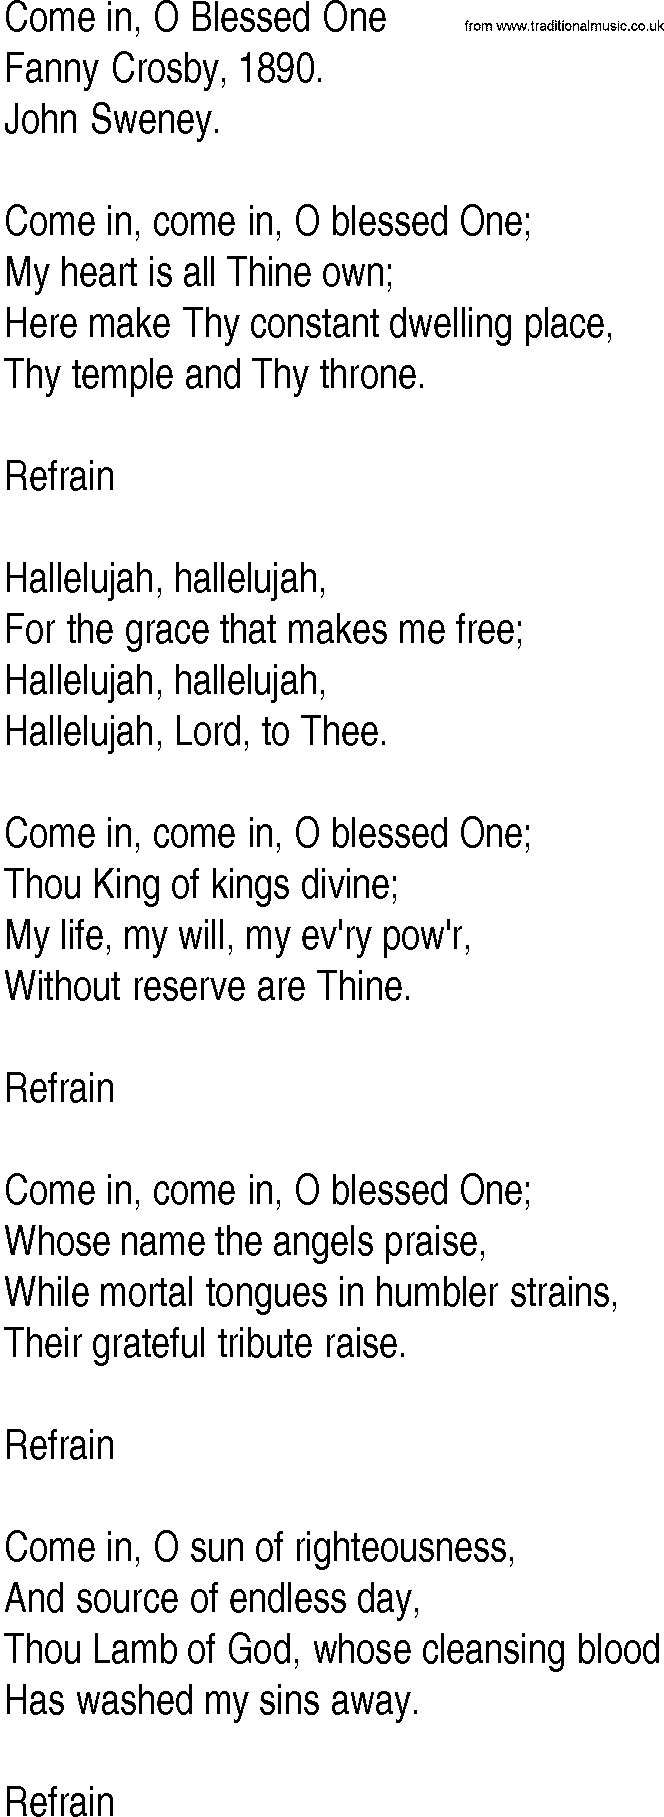 Hymn and Gospel Song: Come in, O Blessed One by Fanny Crosby lyrics